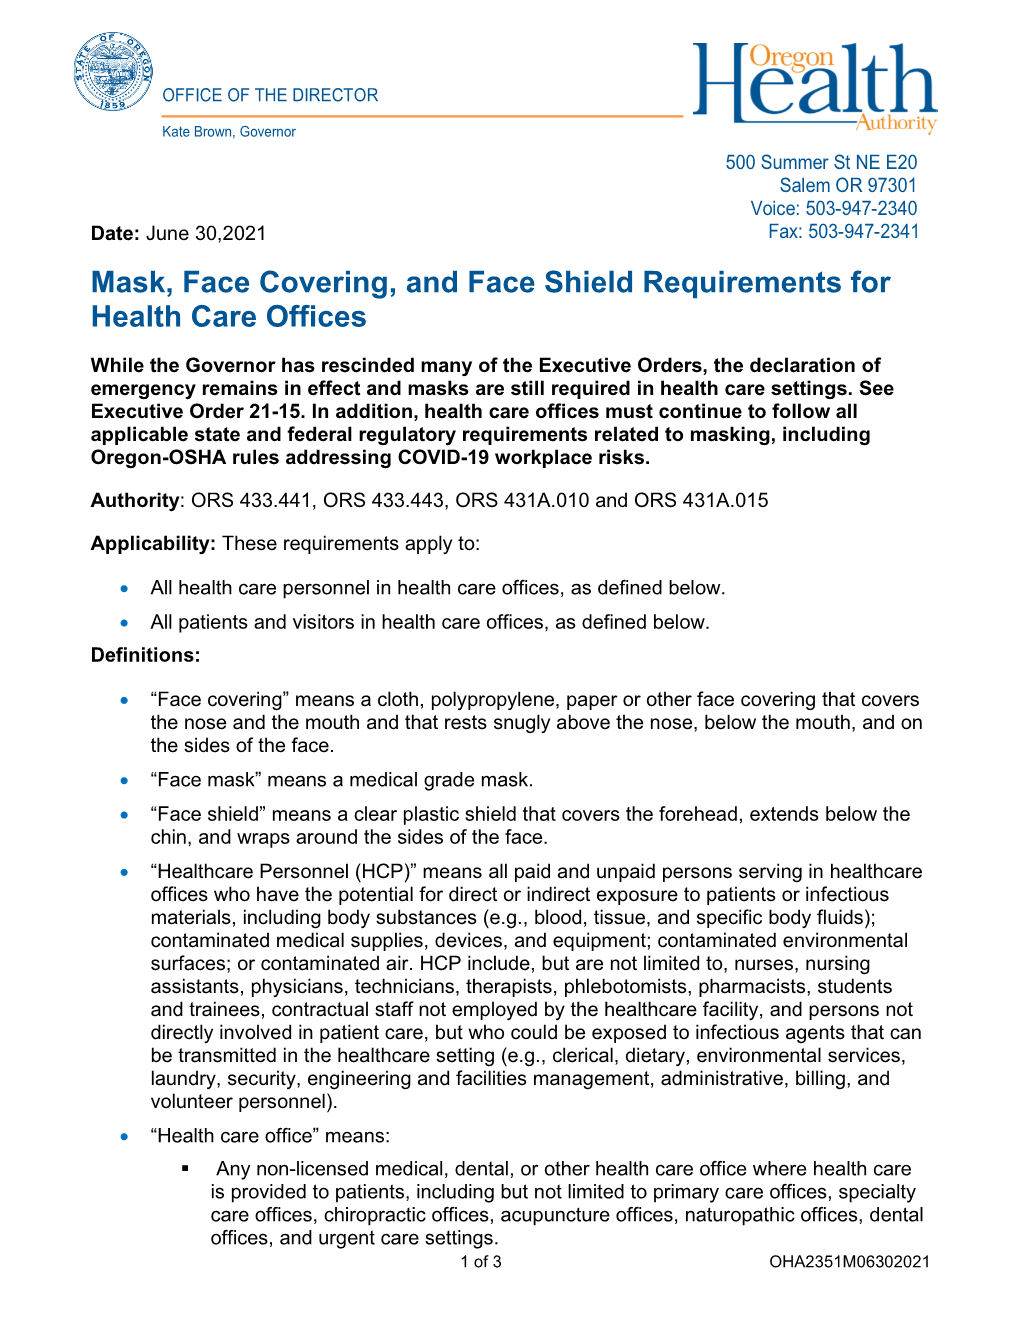 OHA's Mask, Face Covering, and Face Shield Requirements for Health Care